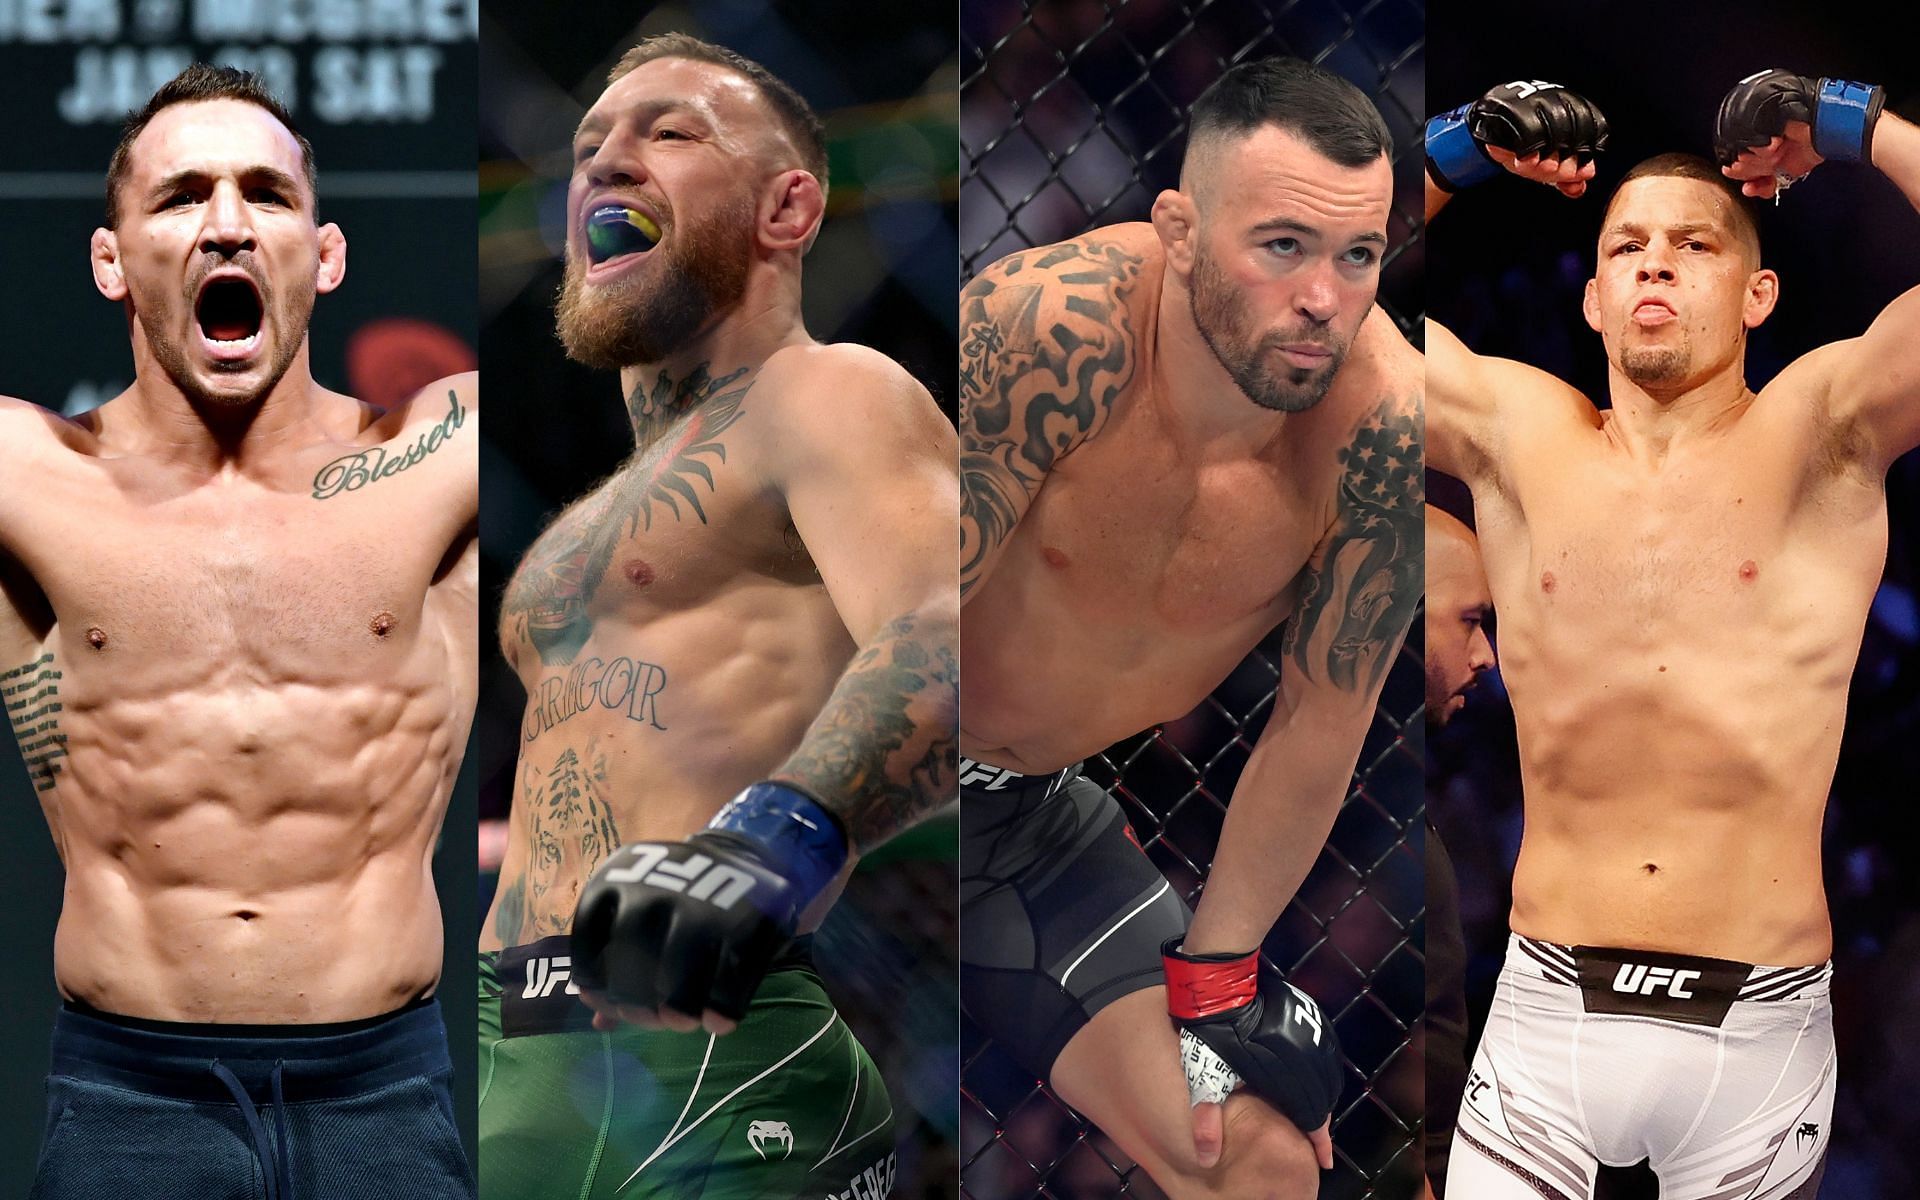 Michael Chandler, Conor McGregor, Colby Covington, and Nate Diaz (Image credits Getty Images)